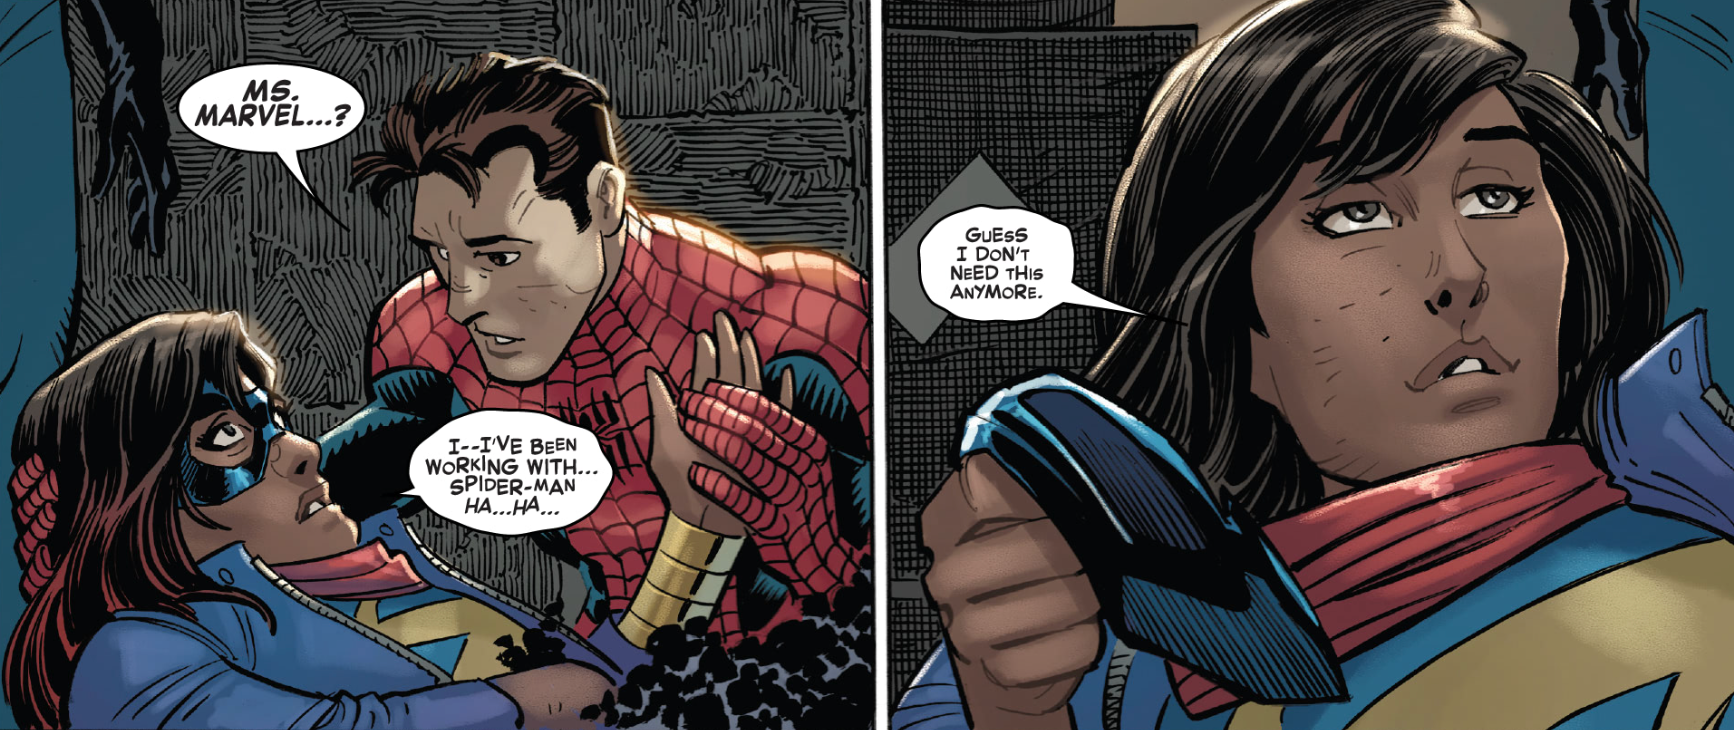 Peter Parker/Spider-Man holds Ms. Marvel as she dies in Marvel's Amazing Spider-Man #26.